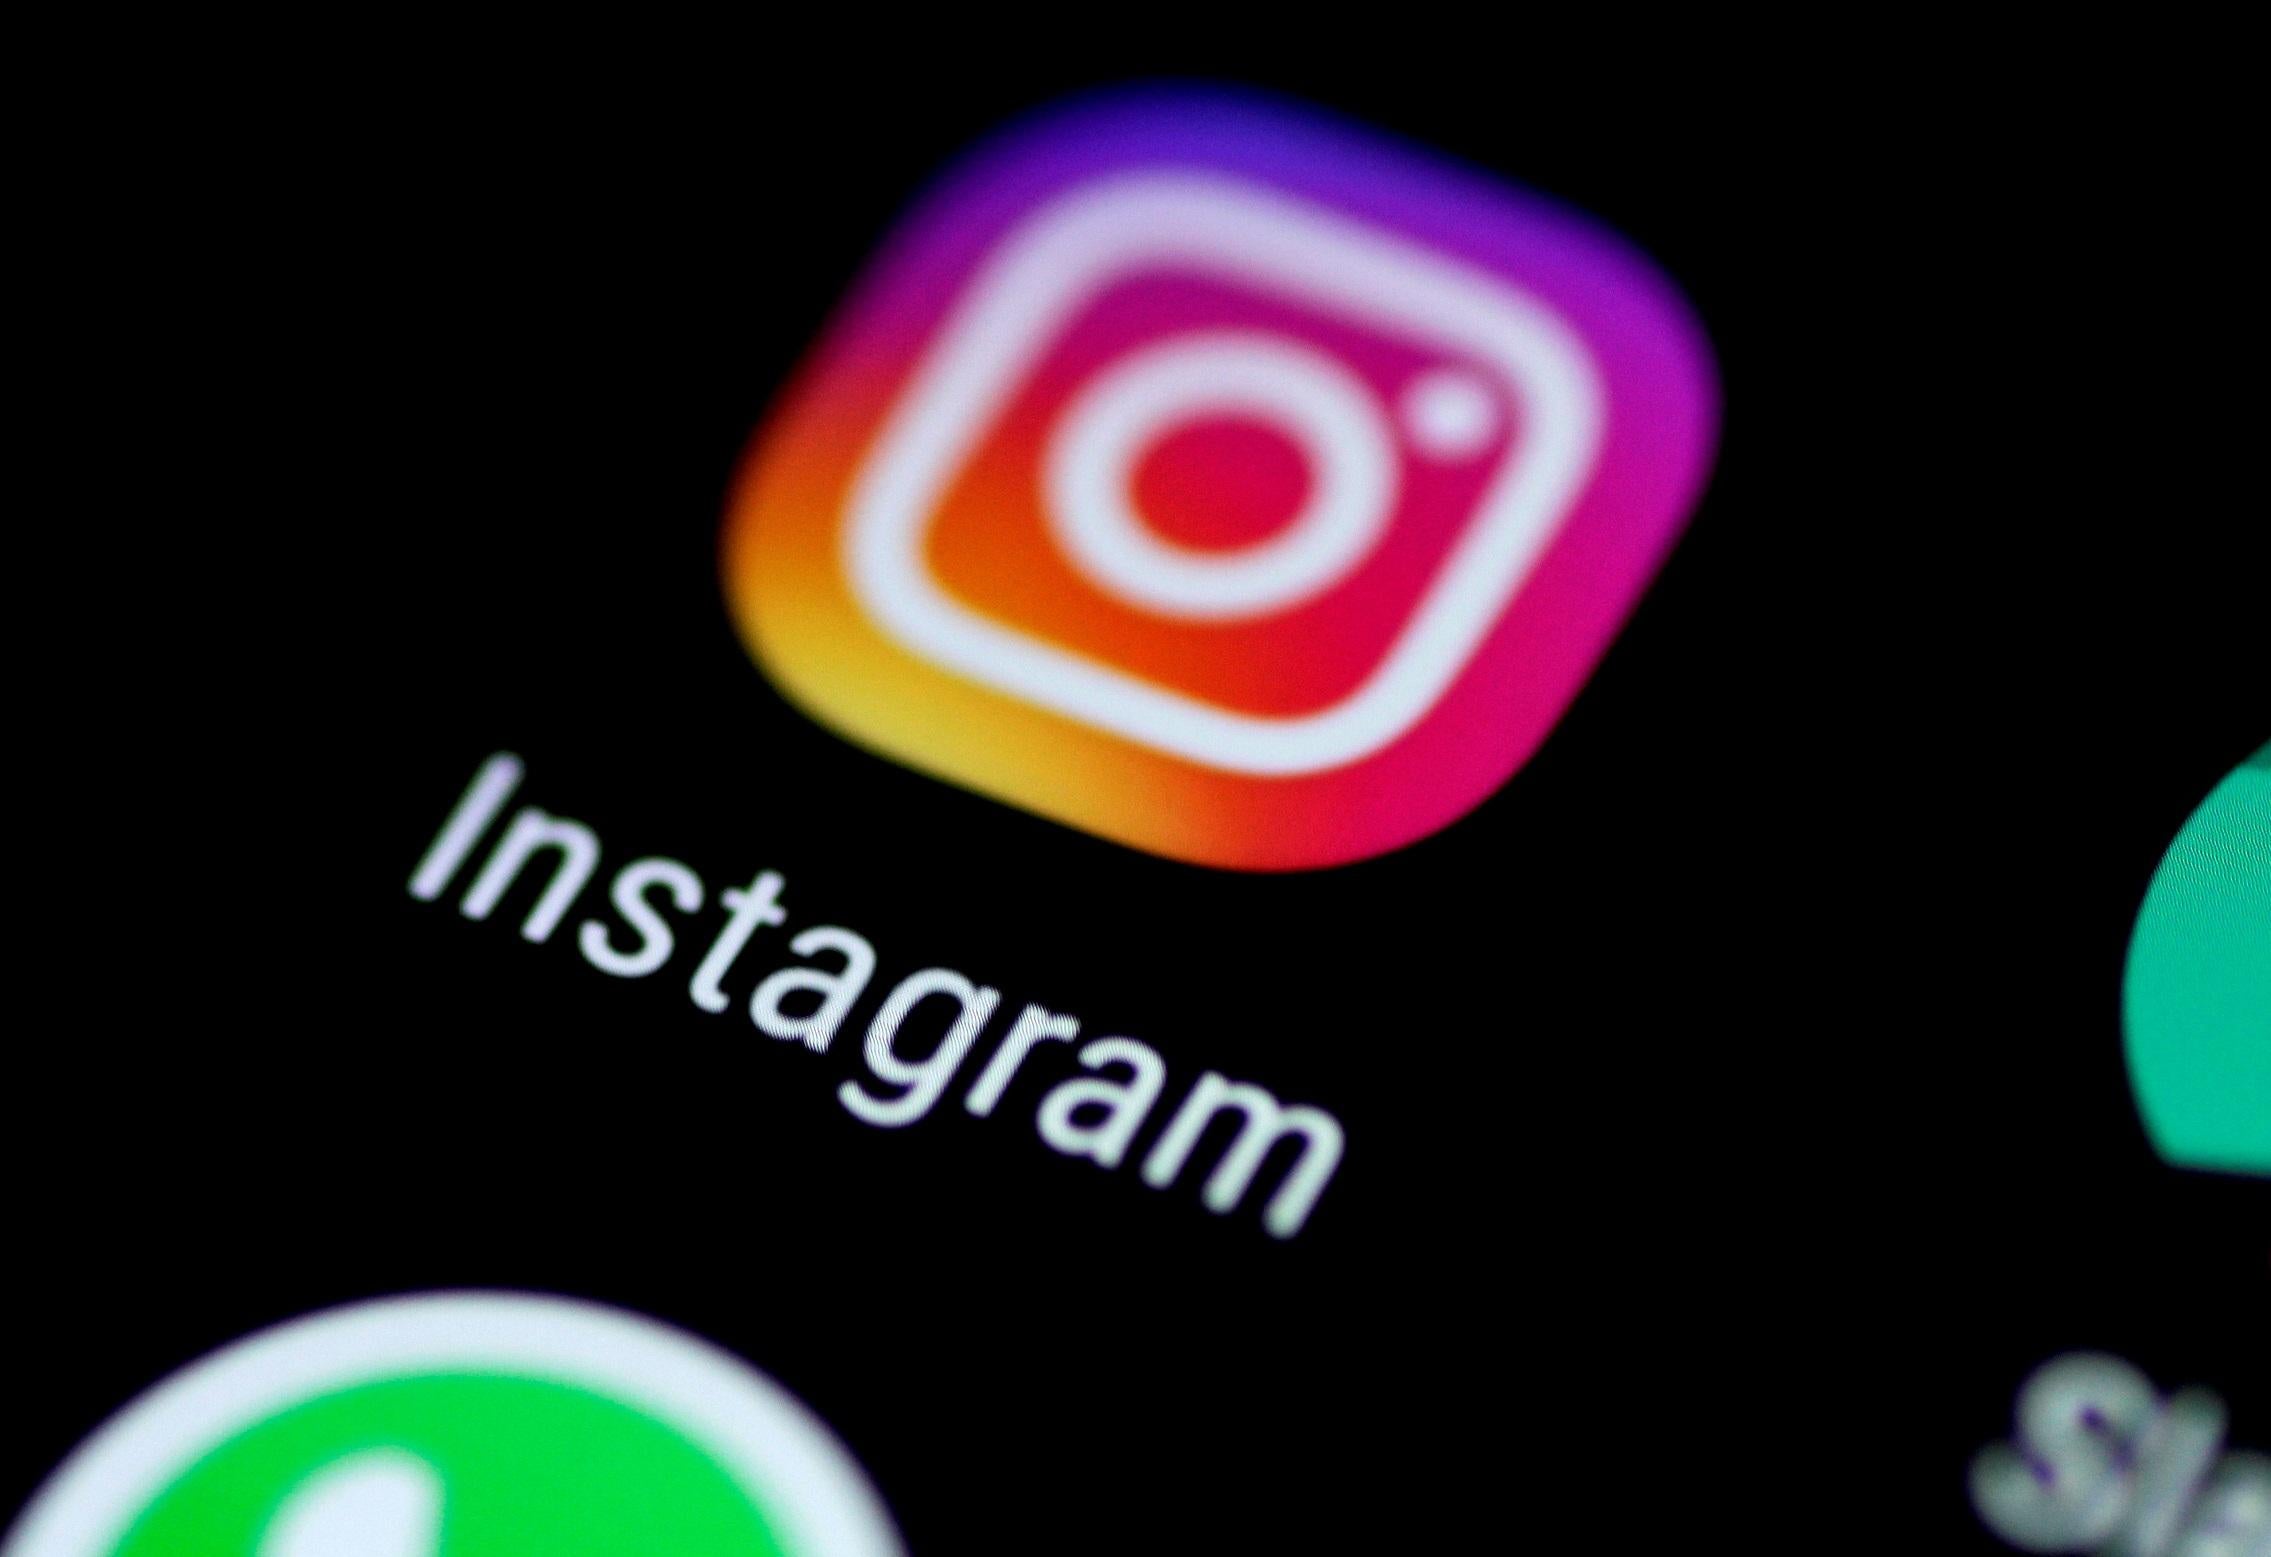 A hacking campaign using Russian email addresses has locked hundreds of people out of their Instagram accounts